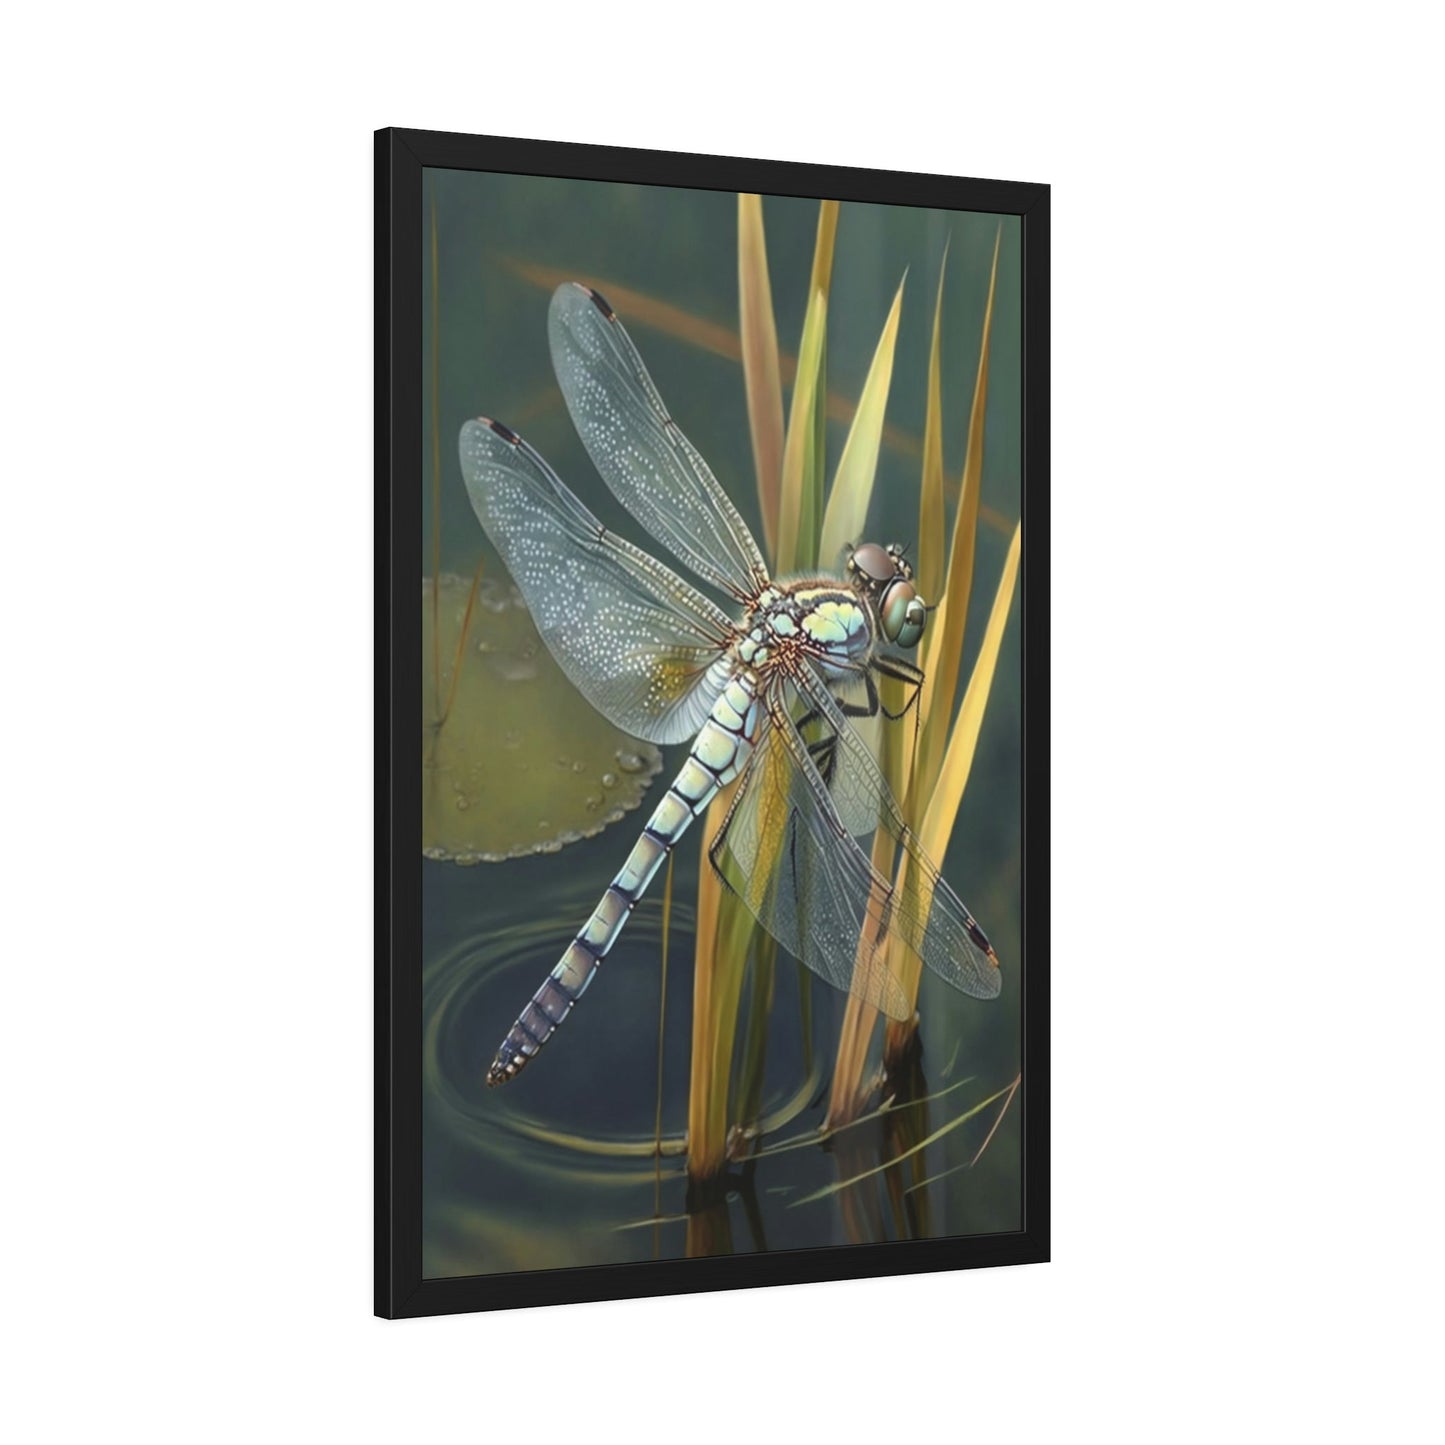 Dragonfly's World: A Framed Poster of These Lovely Insects